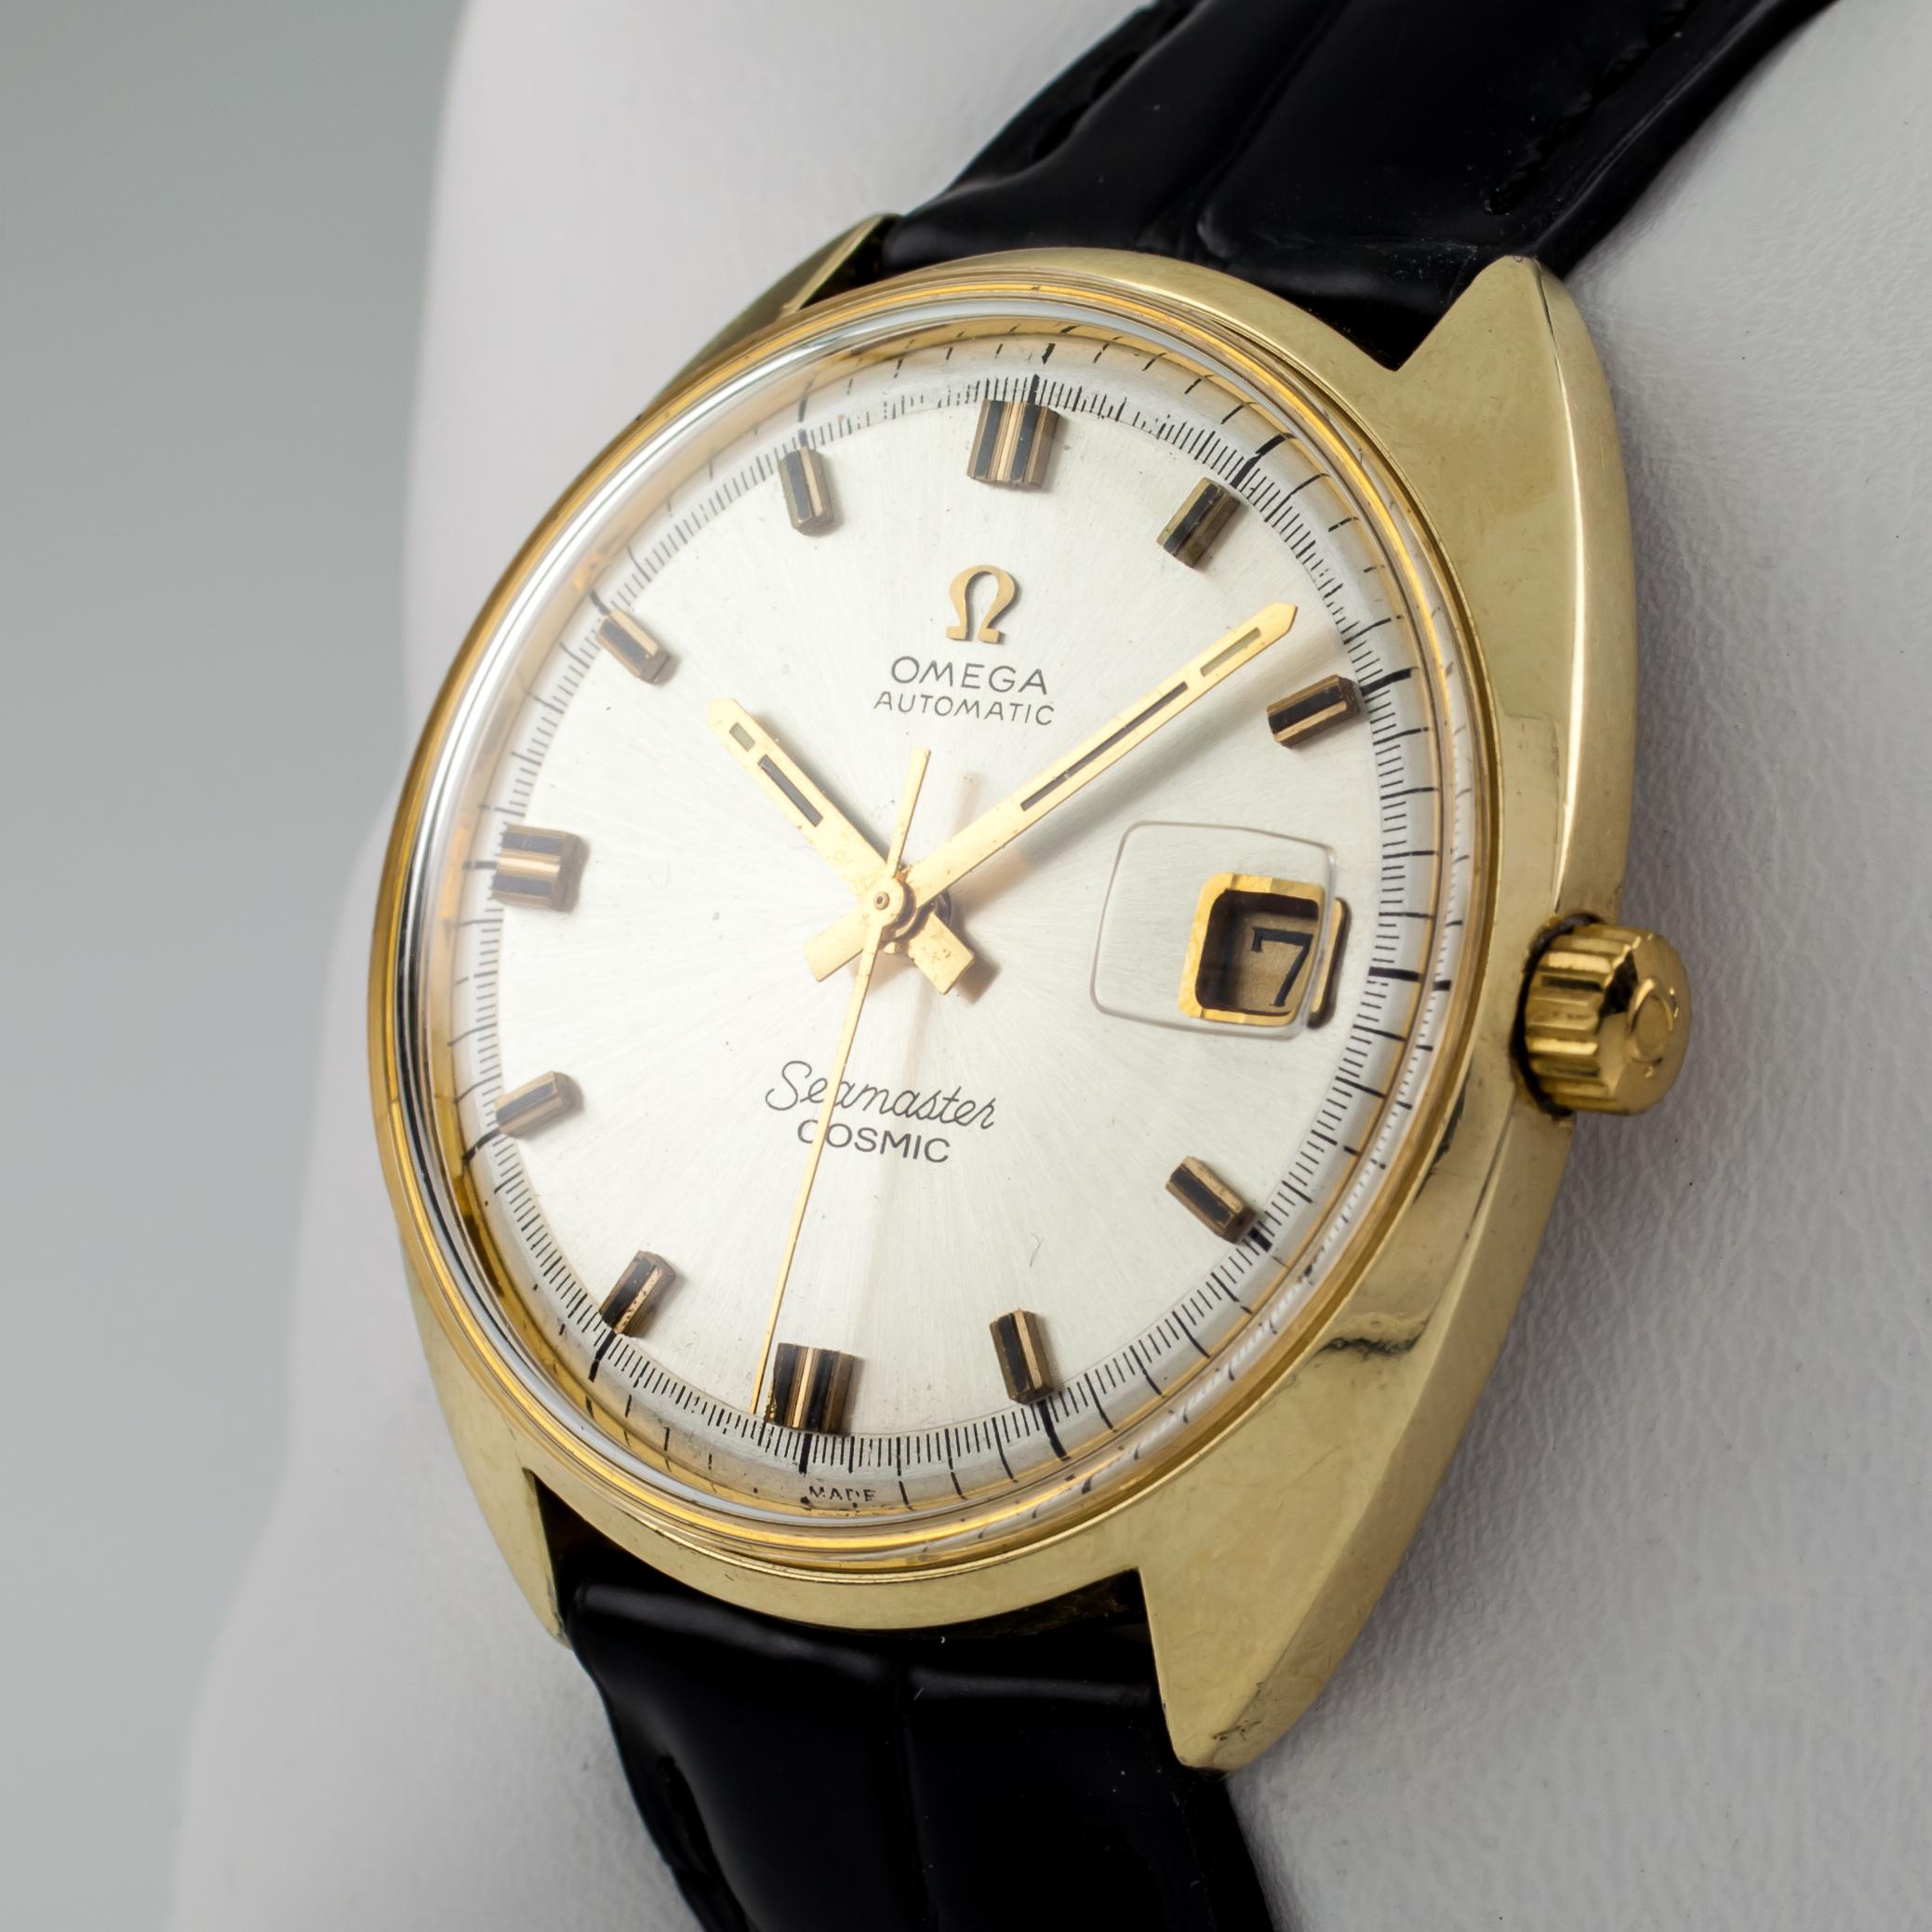 Omega Ω Seamaster Cosmic Men's Automatic Gold-Plated Watch w/ Date Cal. 565
Model: Seamaster Cosmic
Case #166.026
Movement #565
Movement Serial #31915974
Year: Approximately 1970
Gold-Plated Round/Tonneau Case
35 mm in Diameter (37 mm w/